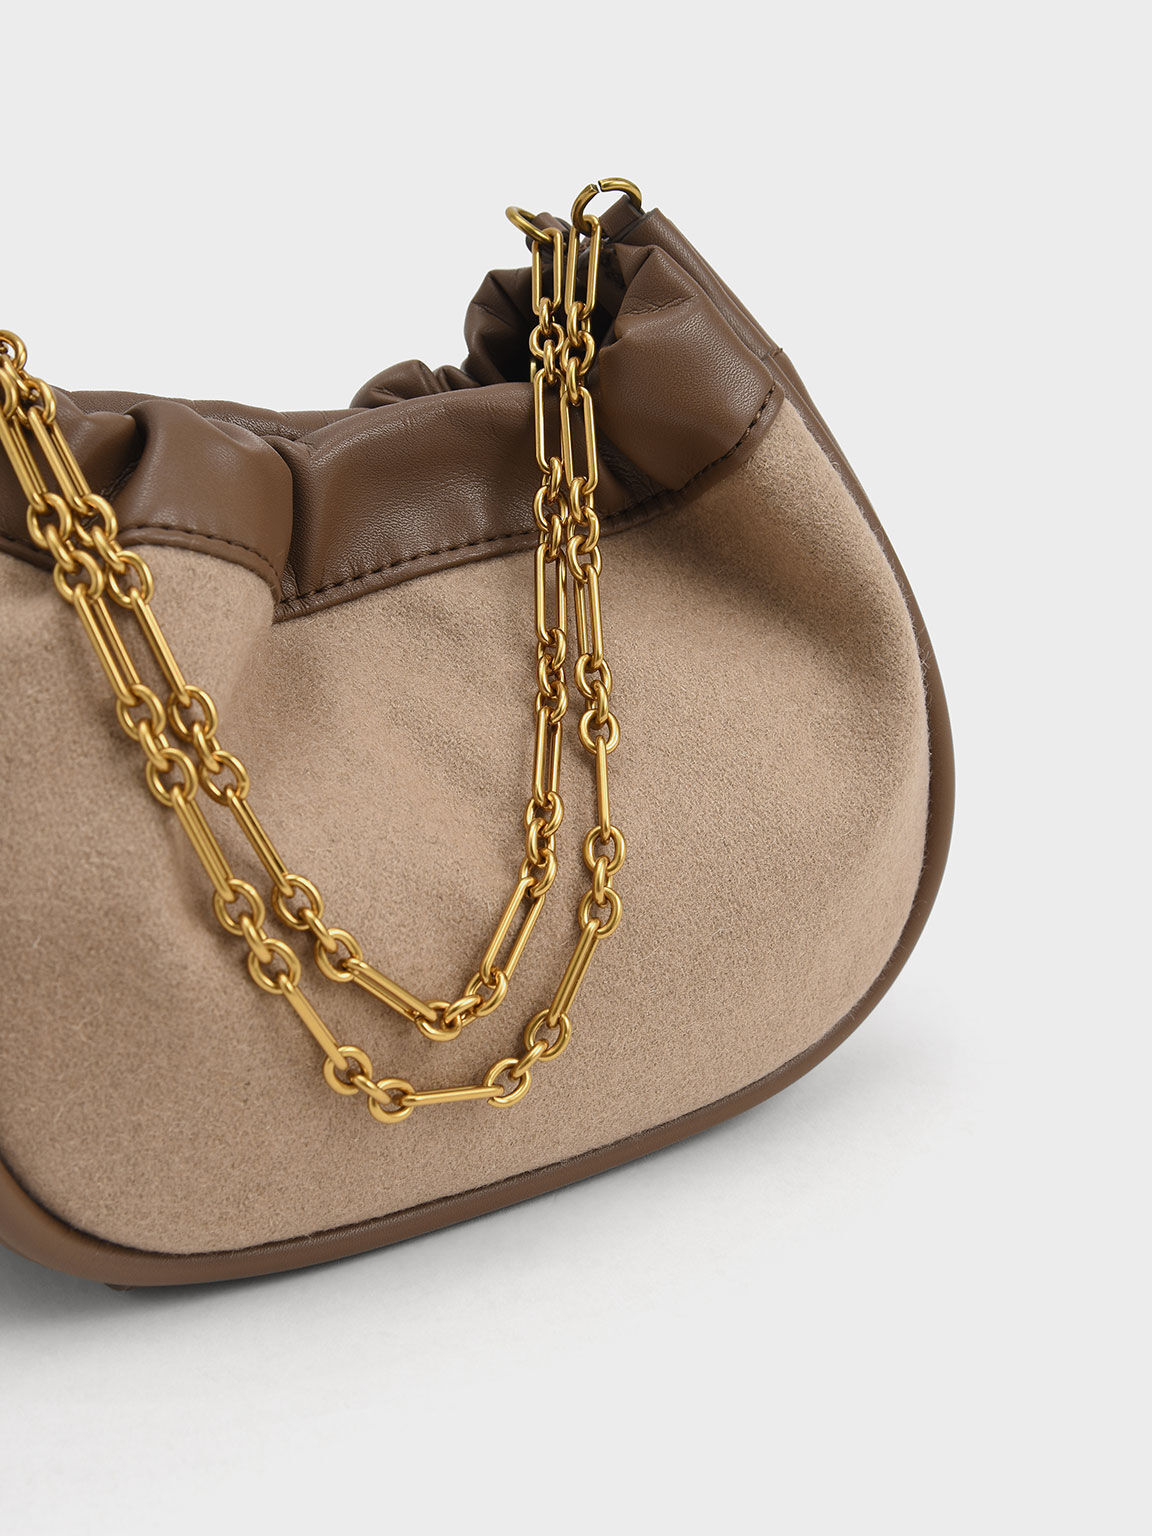 Solange Double Chain Handle Slouchy Bag, Brown, hi-res